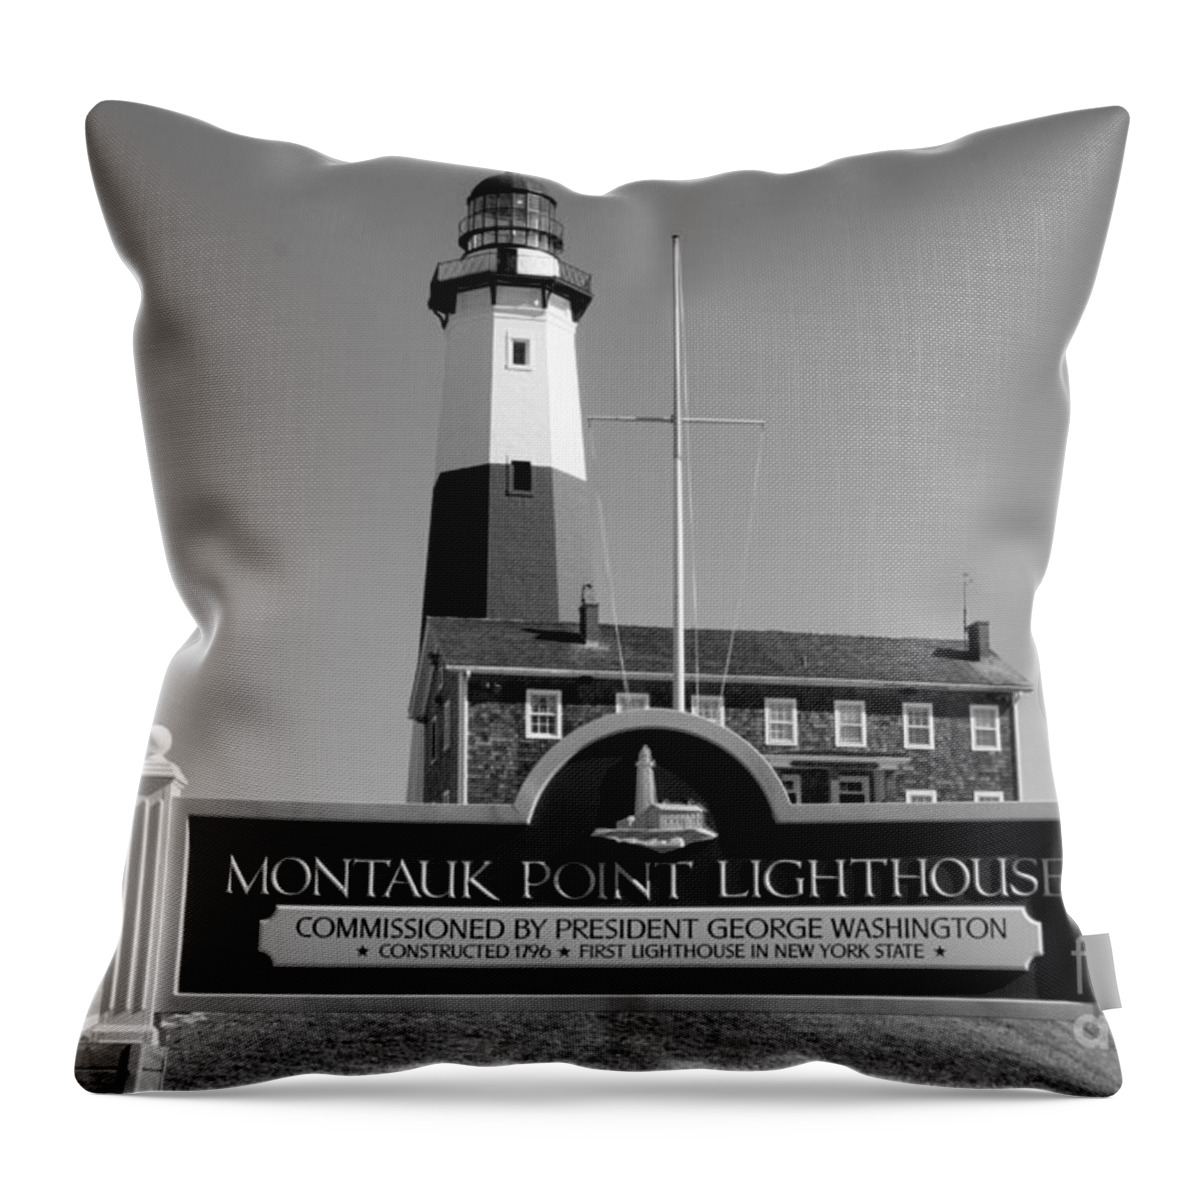 Vintage Looking Montauk Lighthouse Throw Pillow featuring the photograph Vintage Looking Montauk Lighthouse by John Telfer